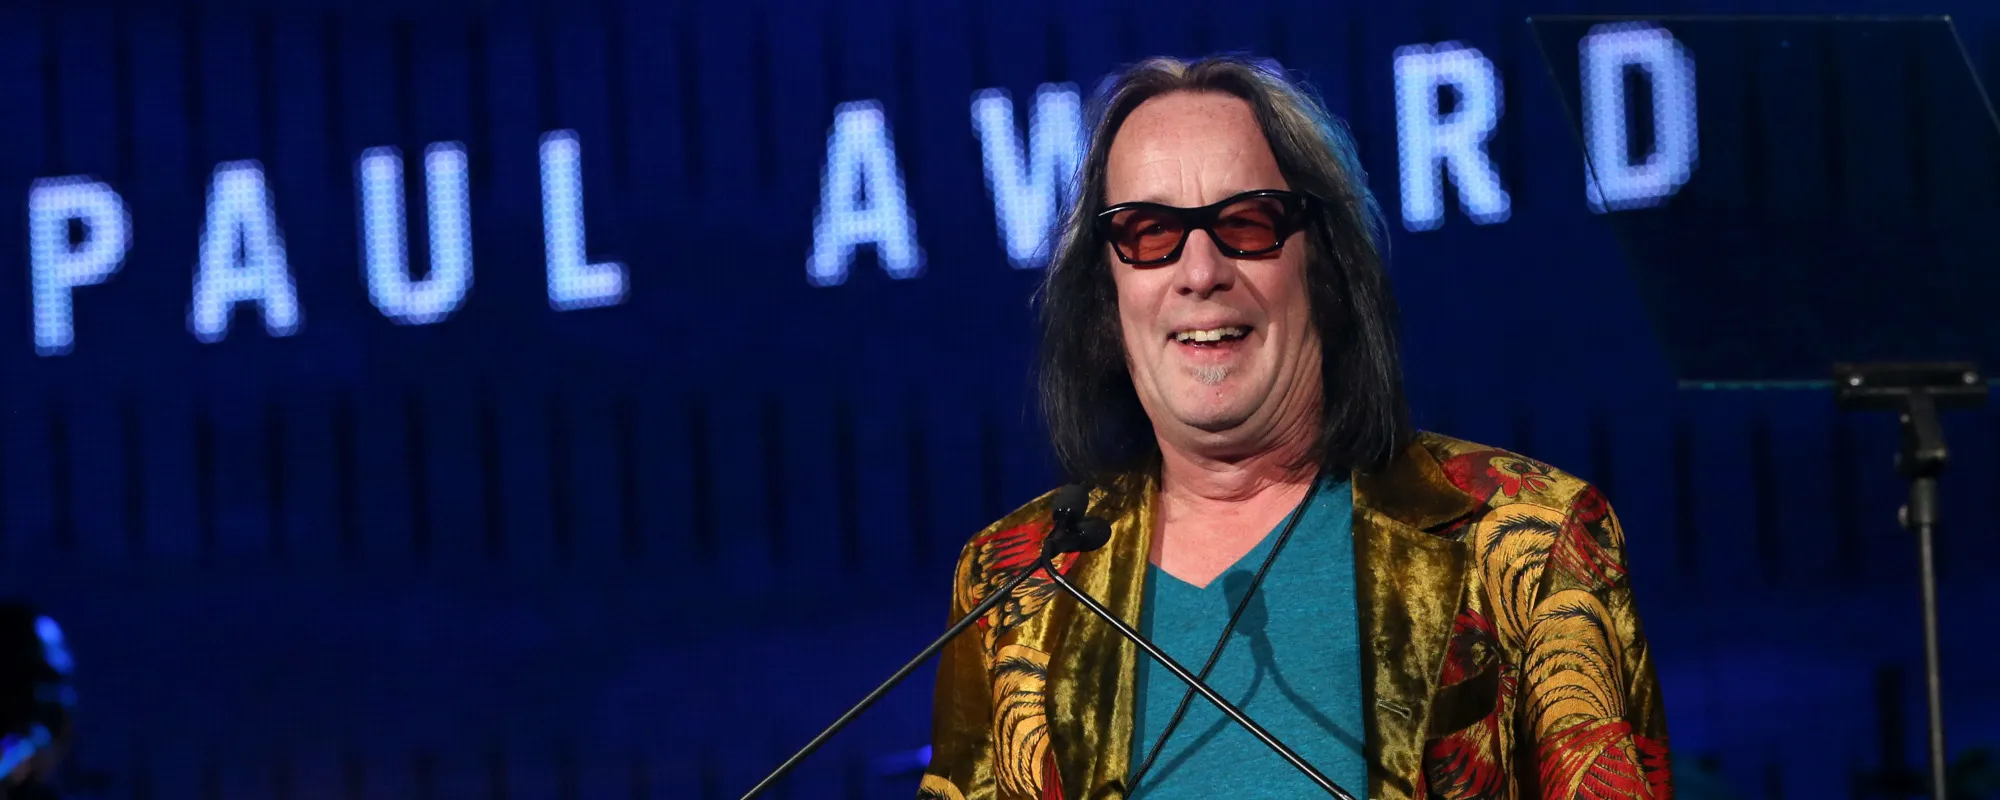 5 Albums You Didn’t Know Todd Rundgren Produced